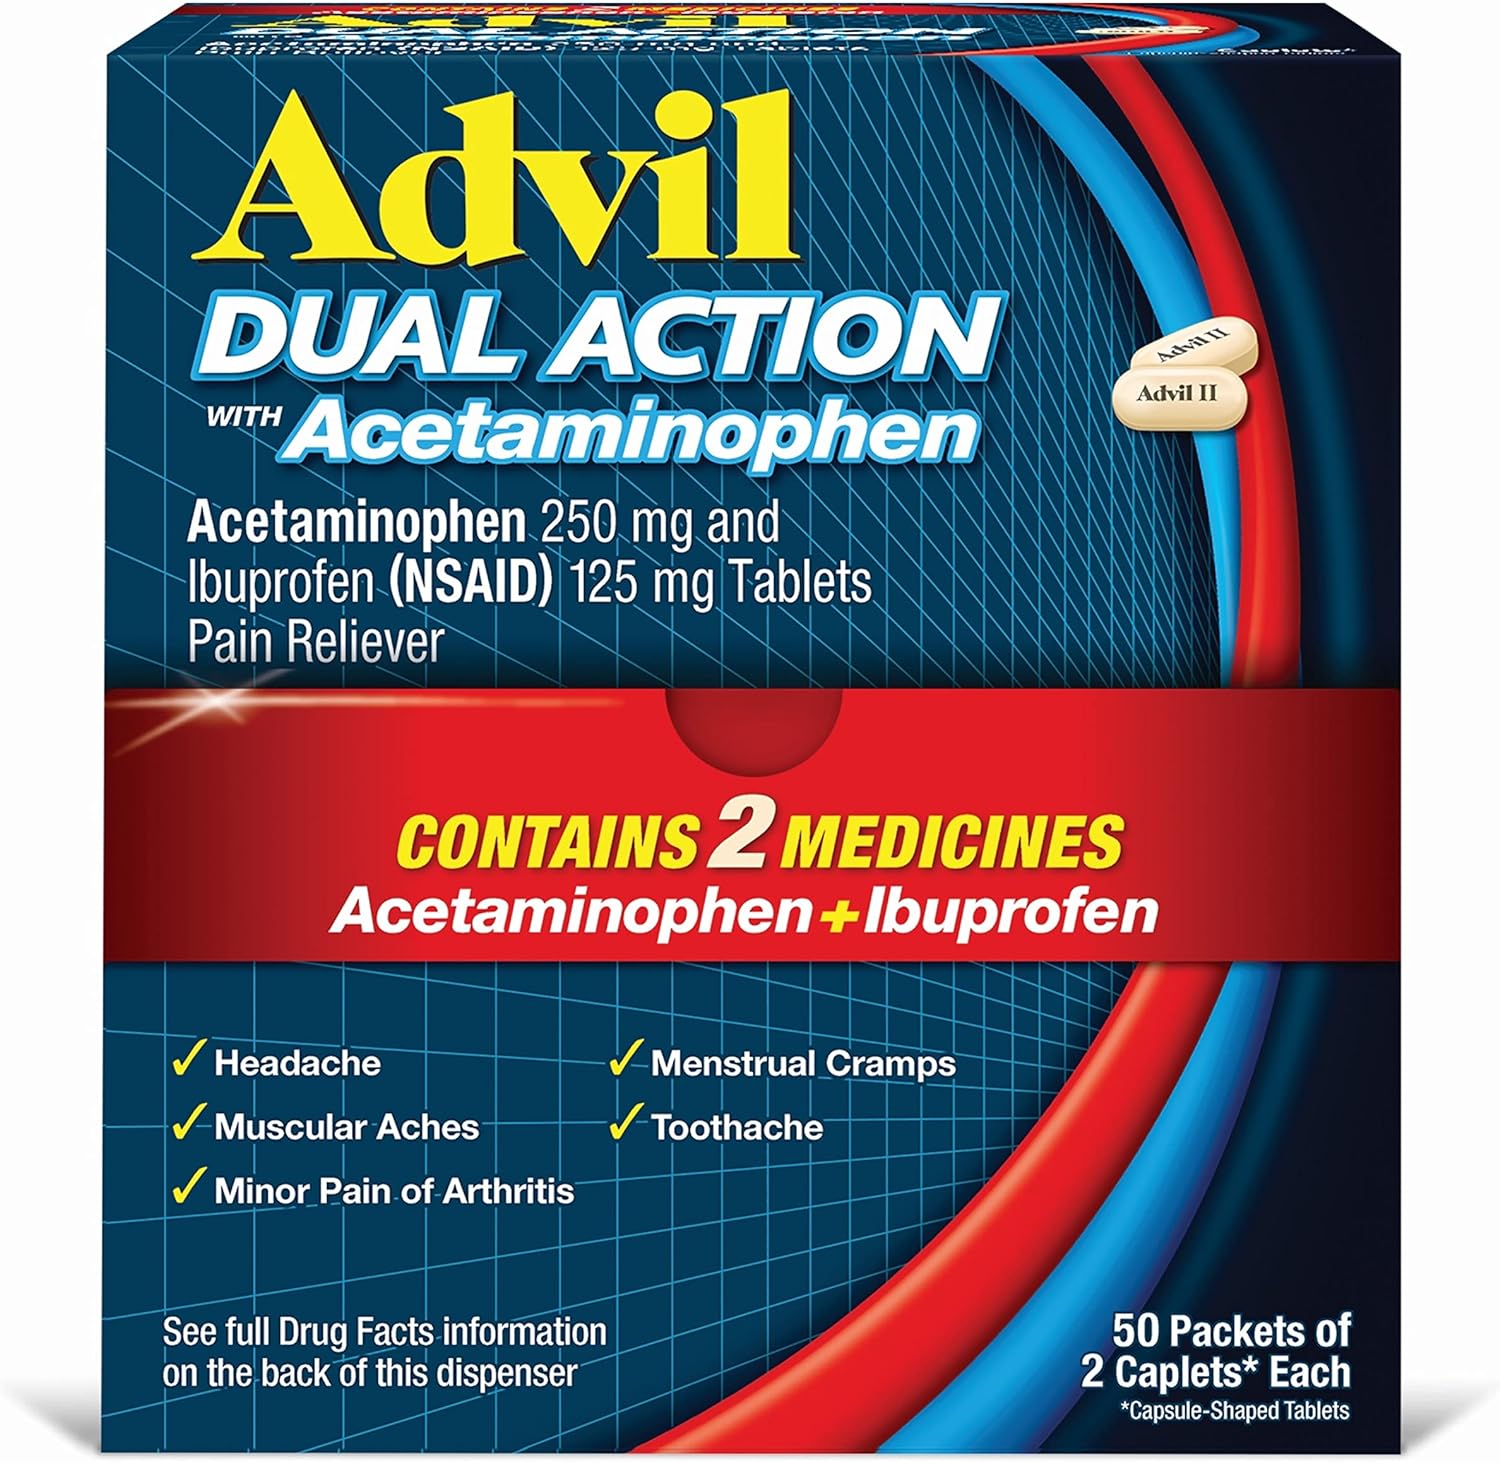 Advil Dual Action Coated Caplets with Acetaminophen, 250 Mg Ibuprofen and 500 Mg Acetaminophen Per Dose (2 Dose Equivalent) for 8 Hour Pain Relief - 2 Count x 50